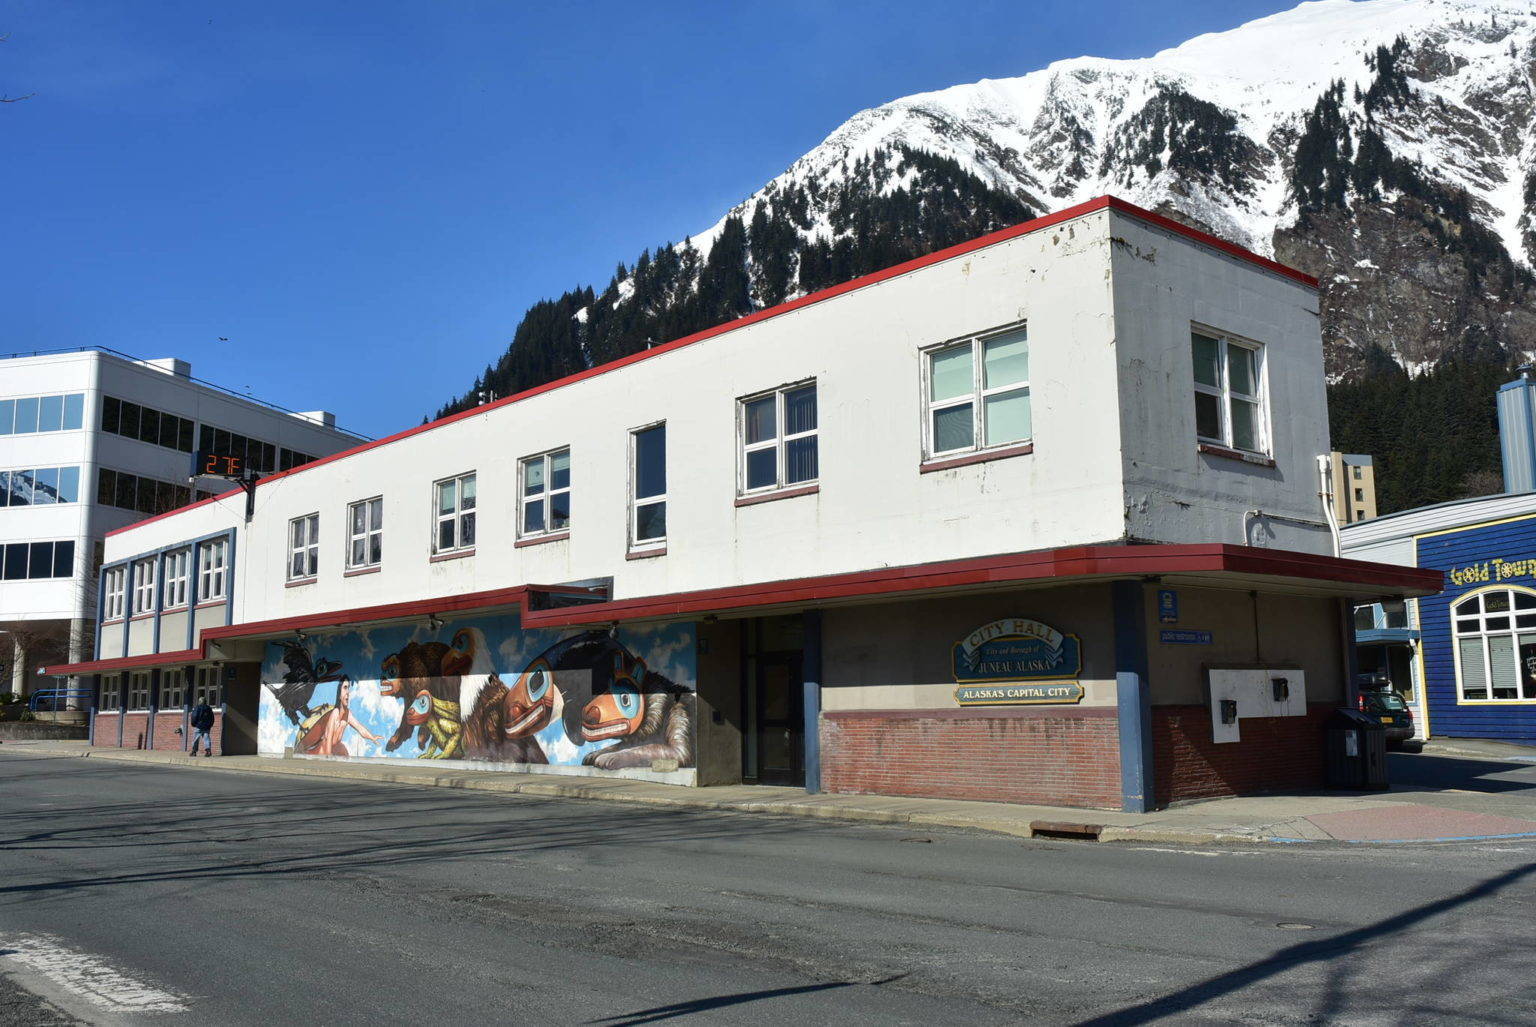 Juneau City Hall, seen here in this file photo, will be open for voting services starting Sept. 21. The Mendenhall Valley Public Library will also double as a vote center and will offer a variety of voting related services until the Oct. 6 municipal election. (Peter Segall / Juneau Empire File)